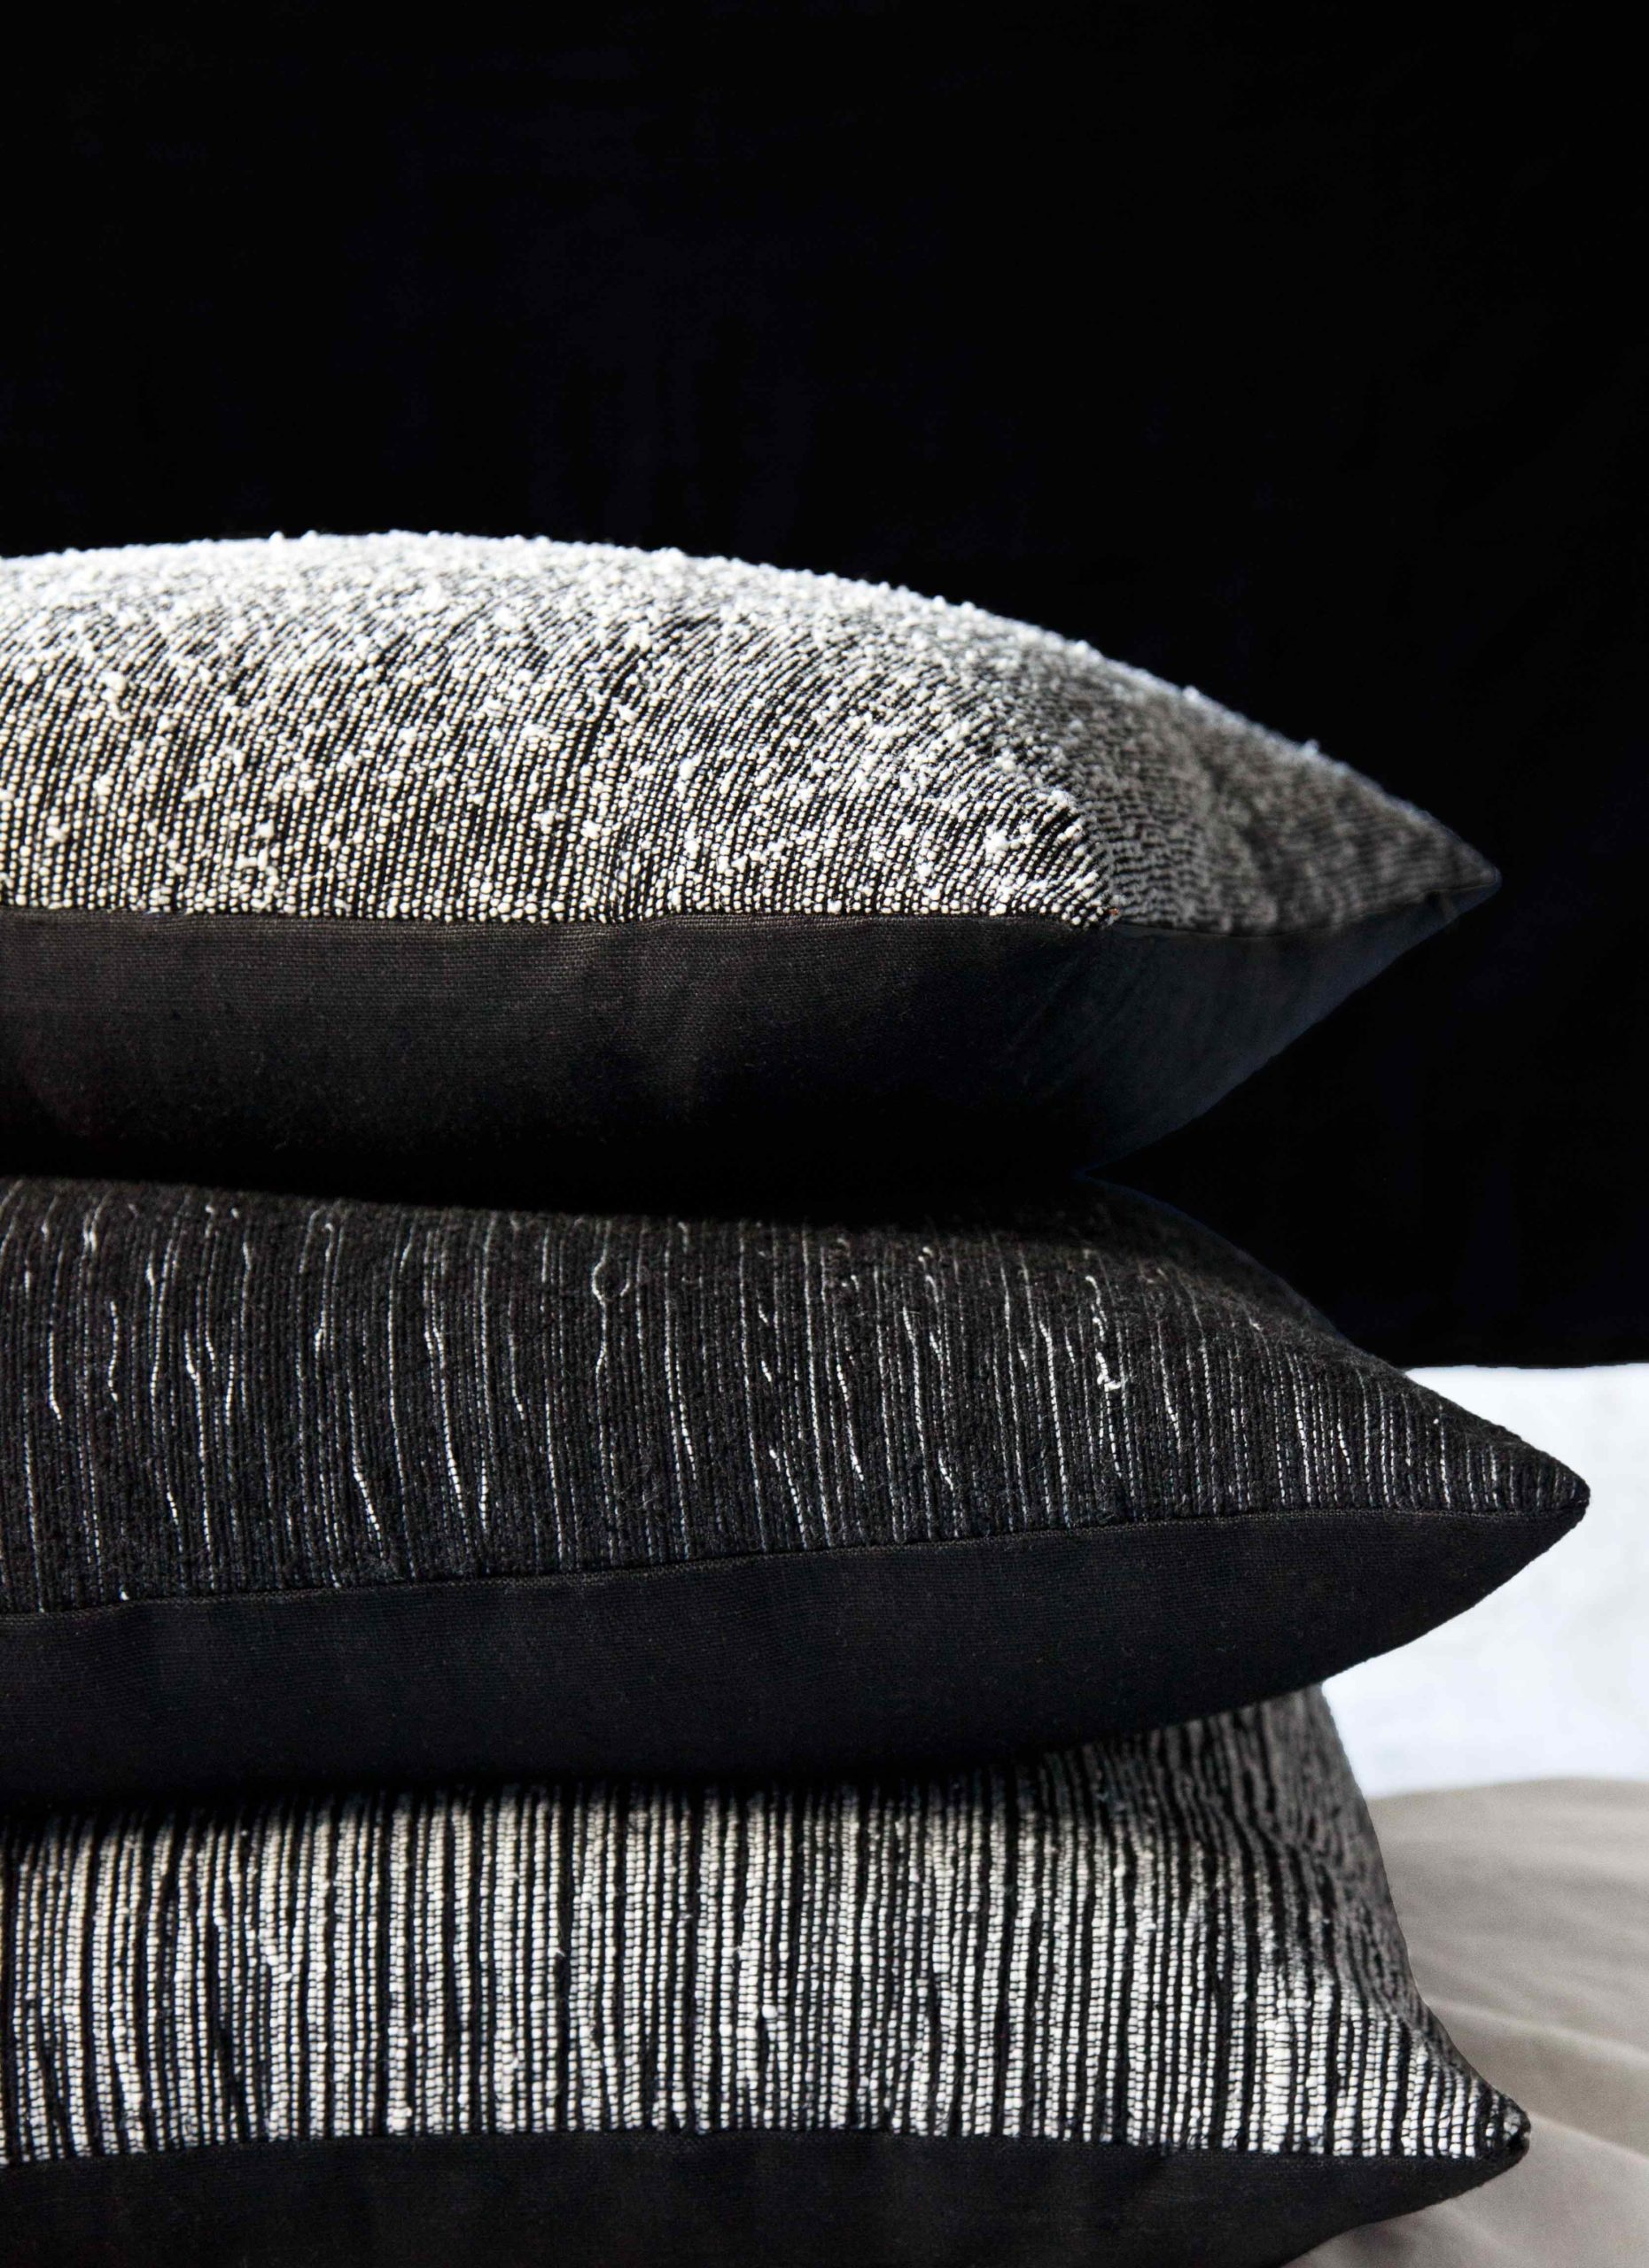 djellaba decorative throw pillows in textured wool and cotton. wool boucle and cotton patterned striations.